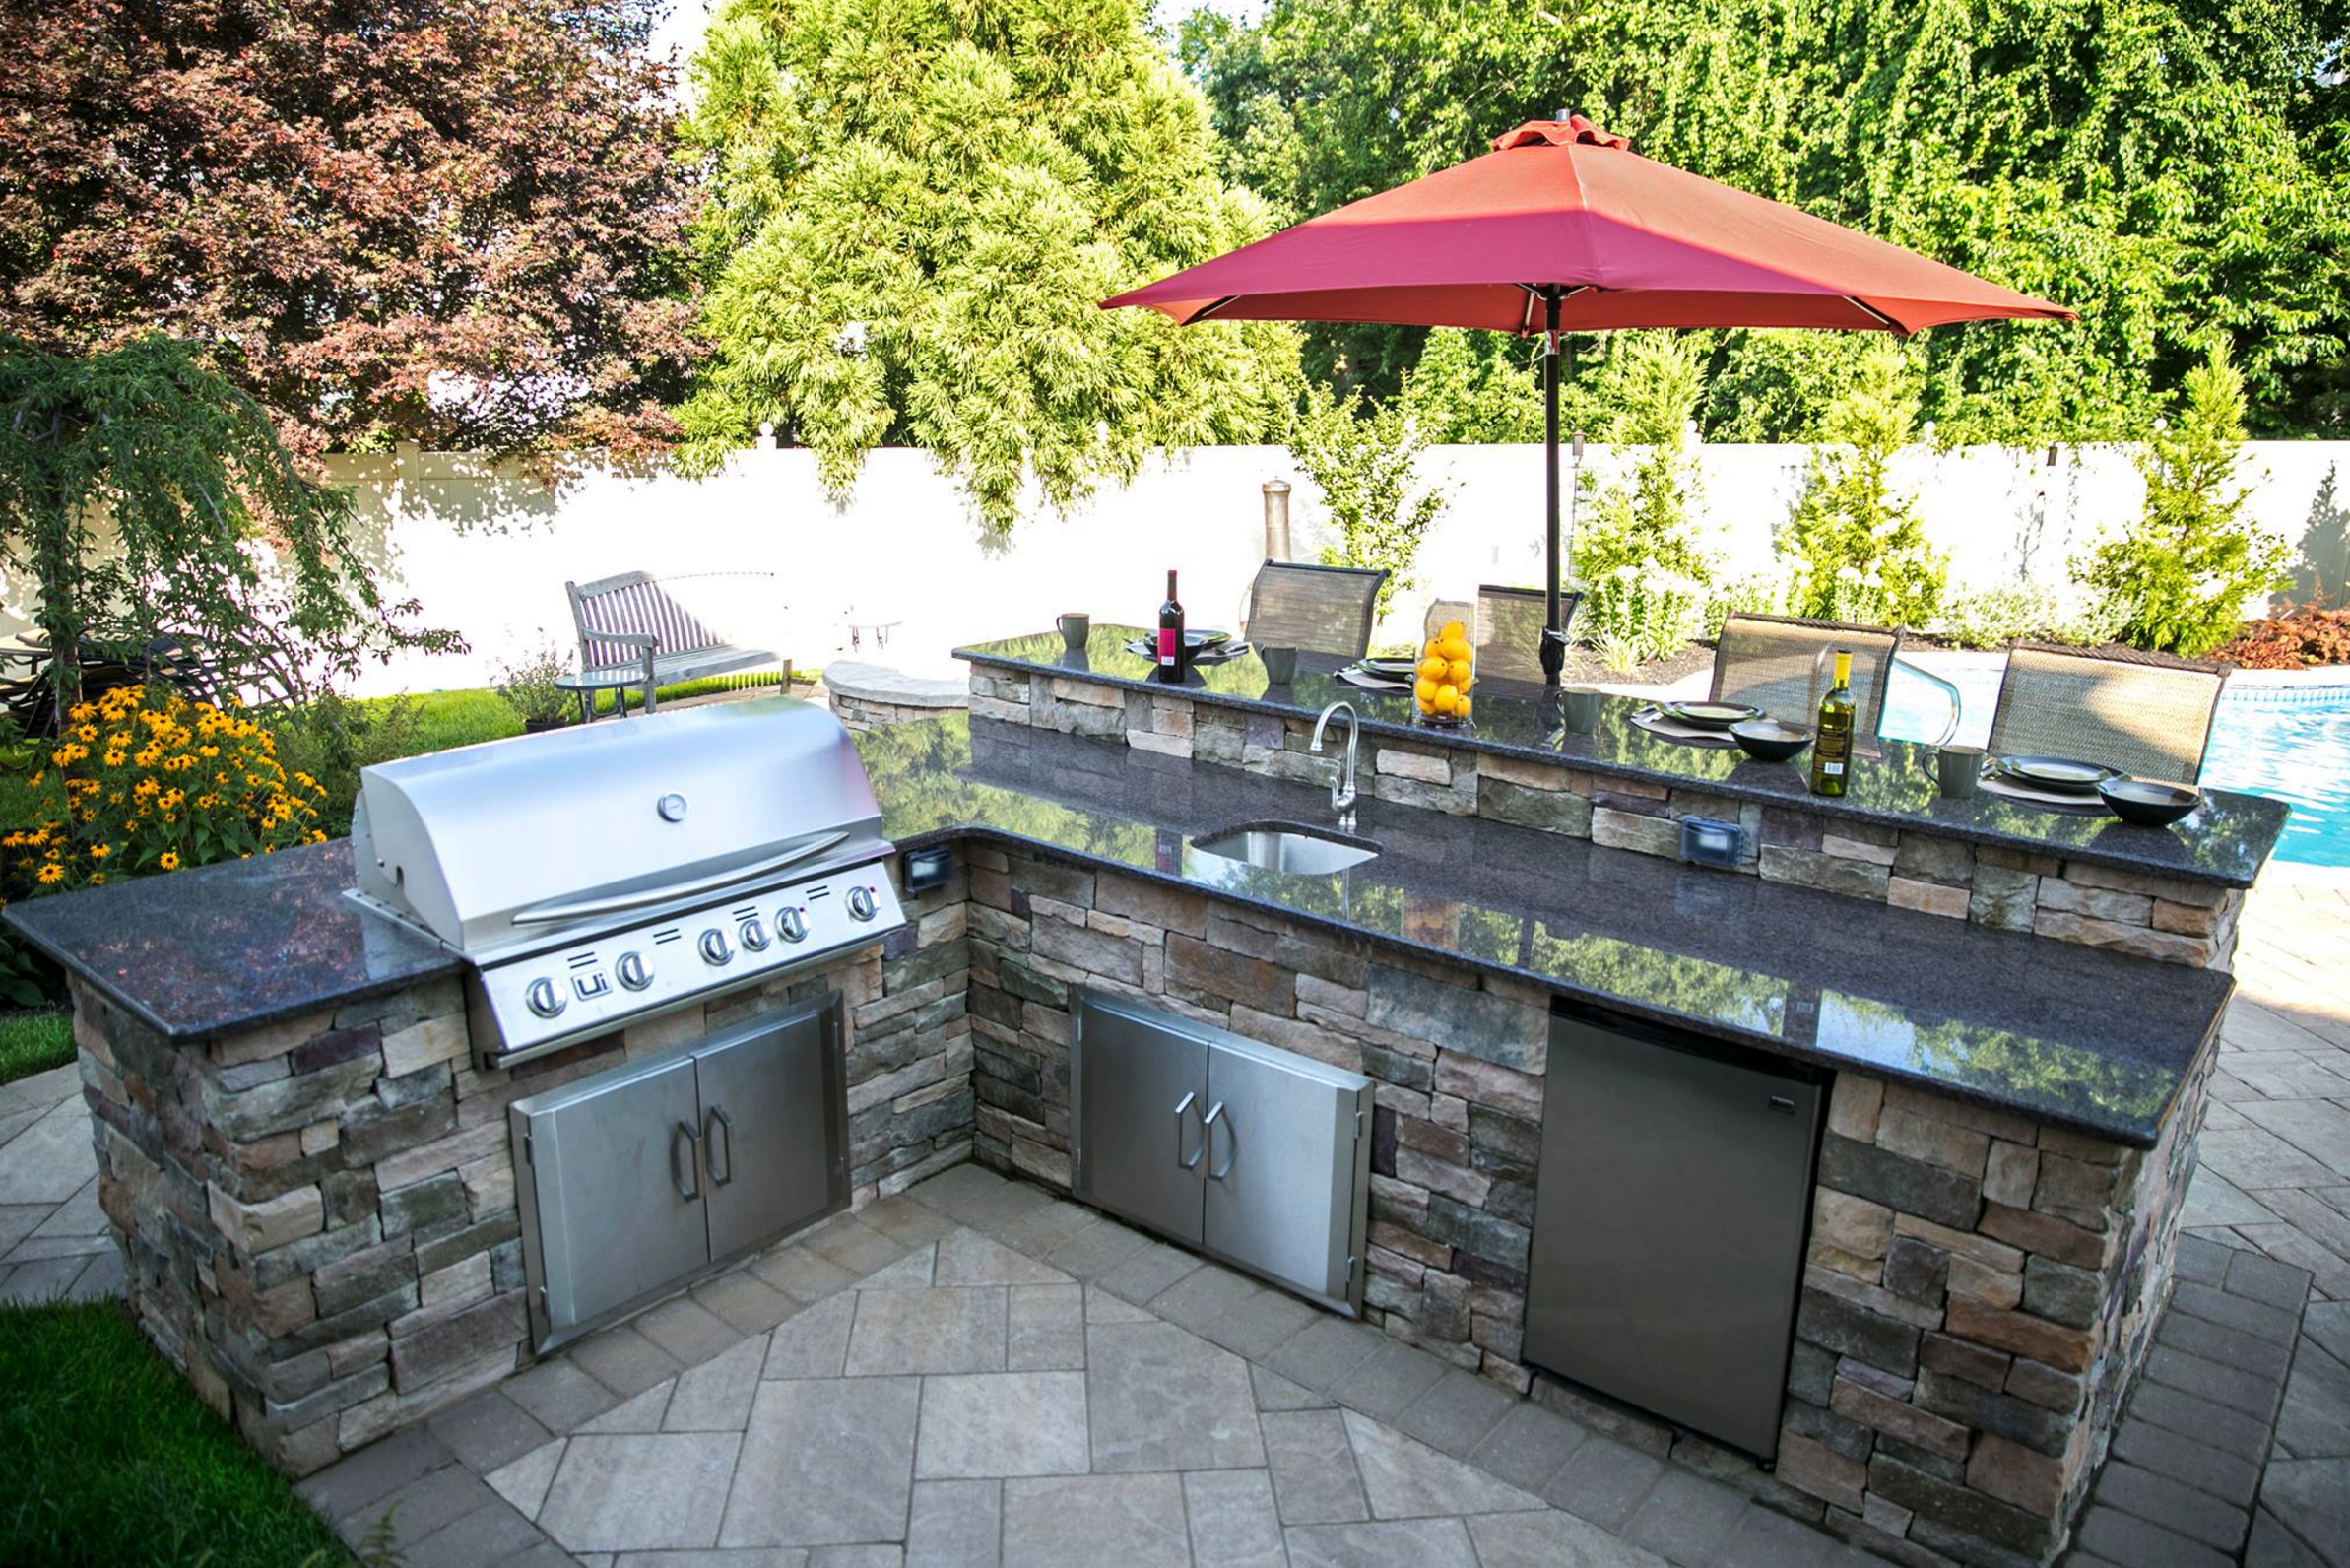  At home relaxation  OUTDOOR KITCHENS IN BROOKHAVEN, NY    LEARN MORE  